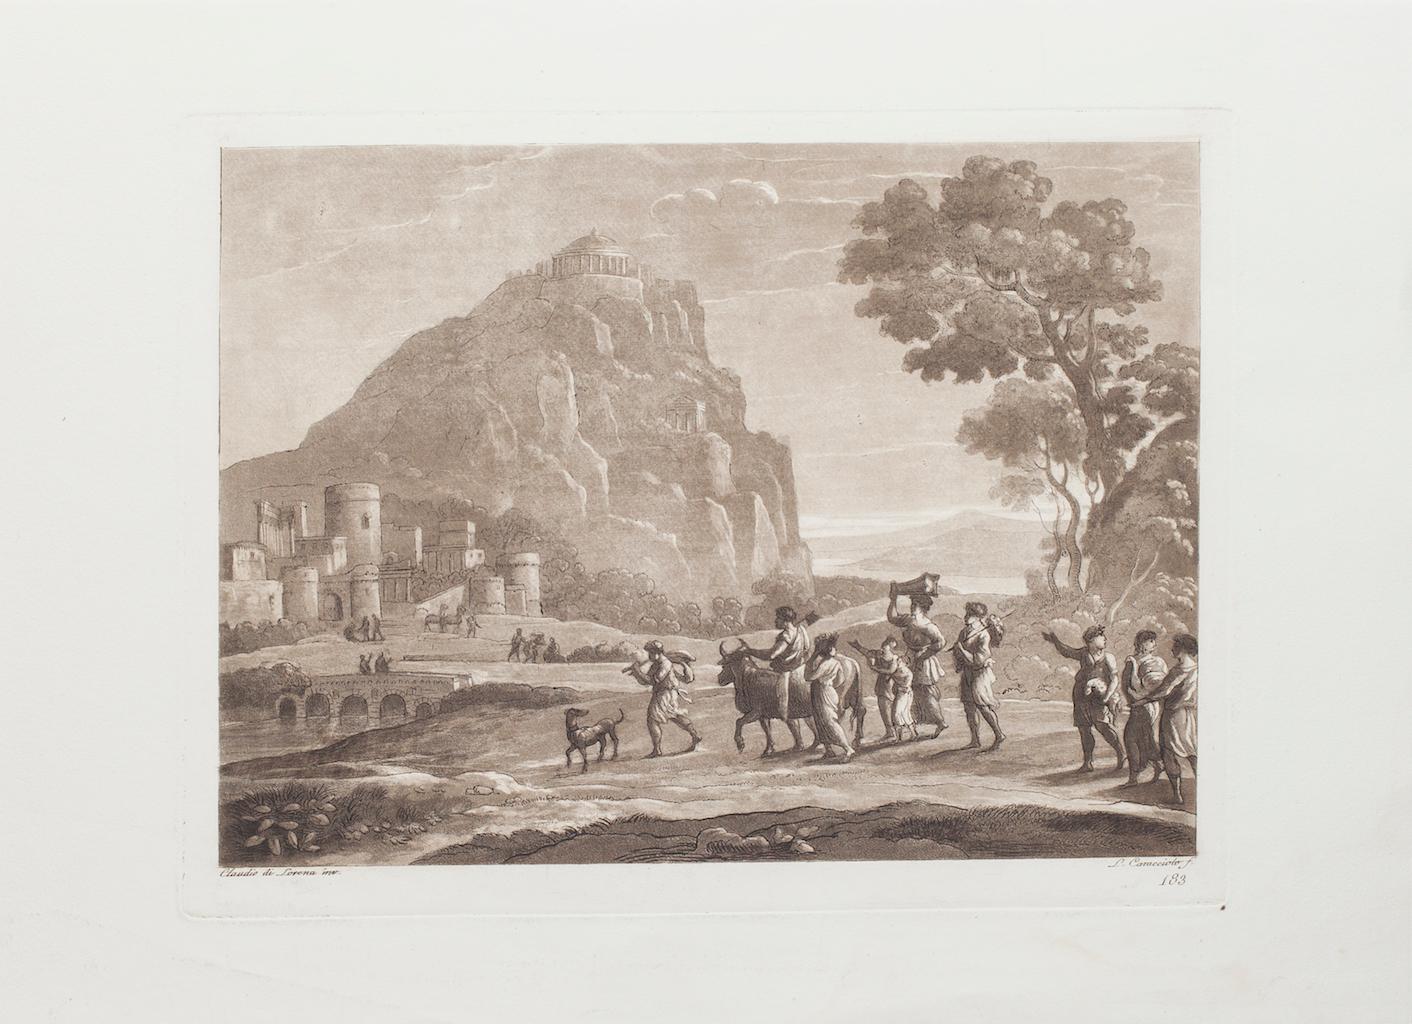 Ludovico Caracciolo (after) Landscape Print - Landscape - Etching and Aquatint on Paper by L. Caracciolo After C. Lorrain